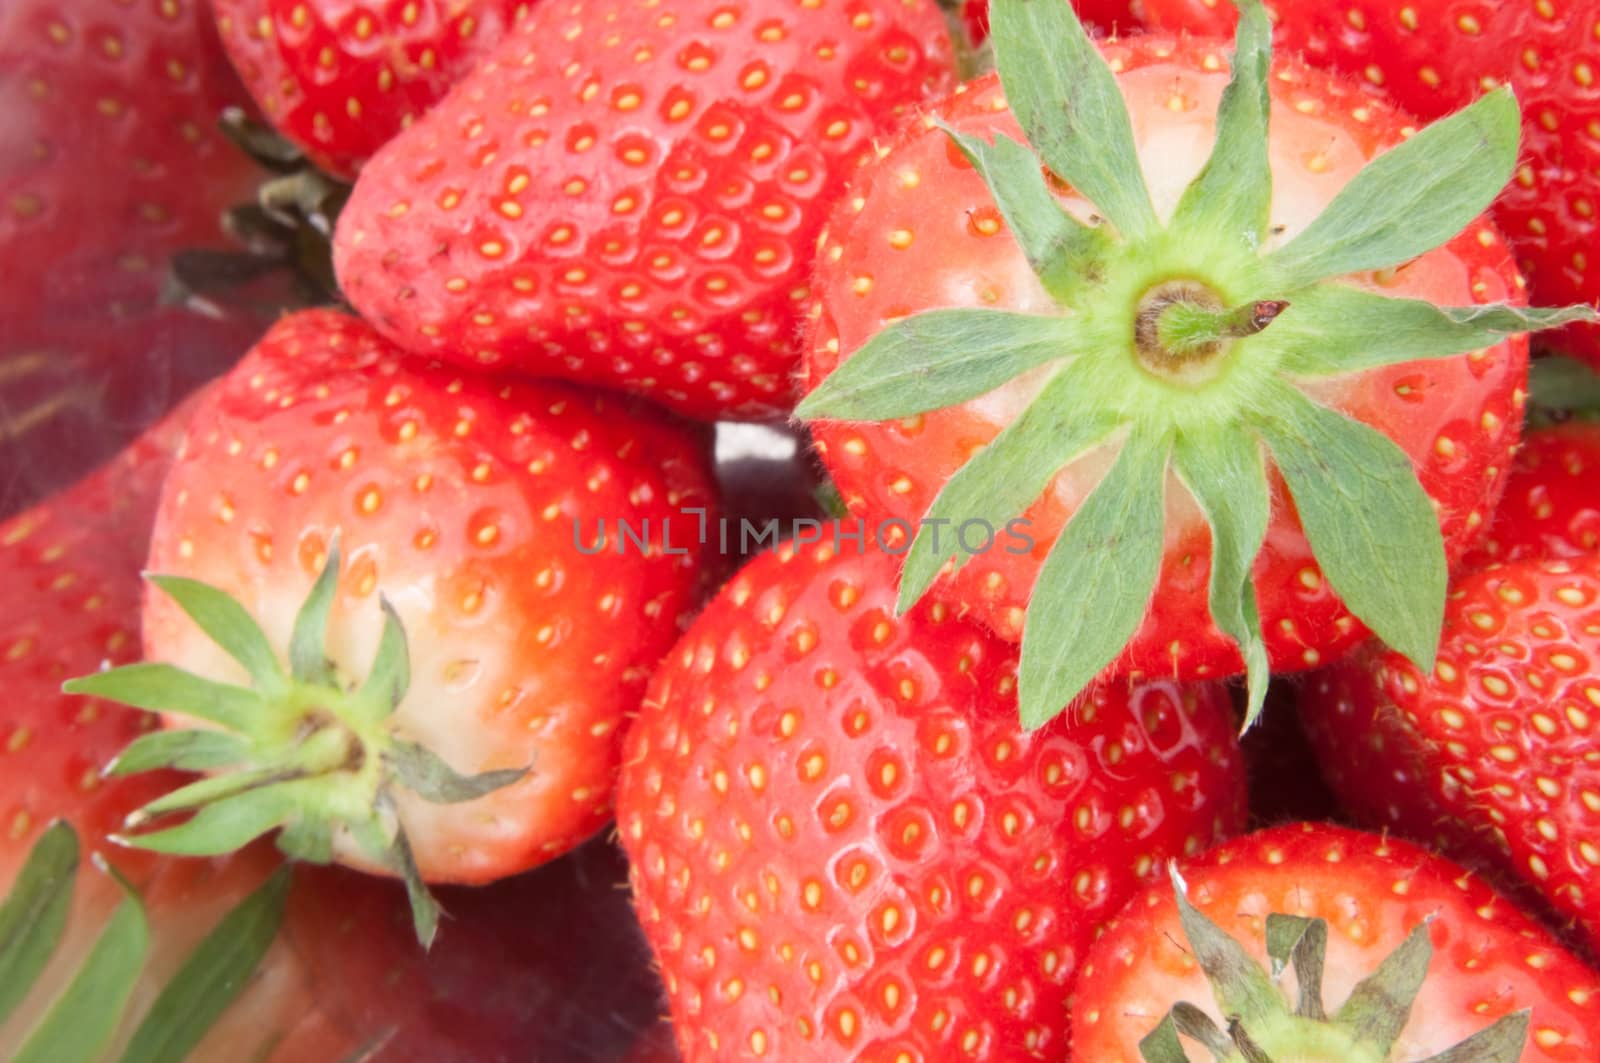 Close up of many fresh strawberries in a stainless steel bowl.